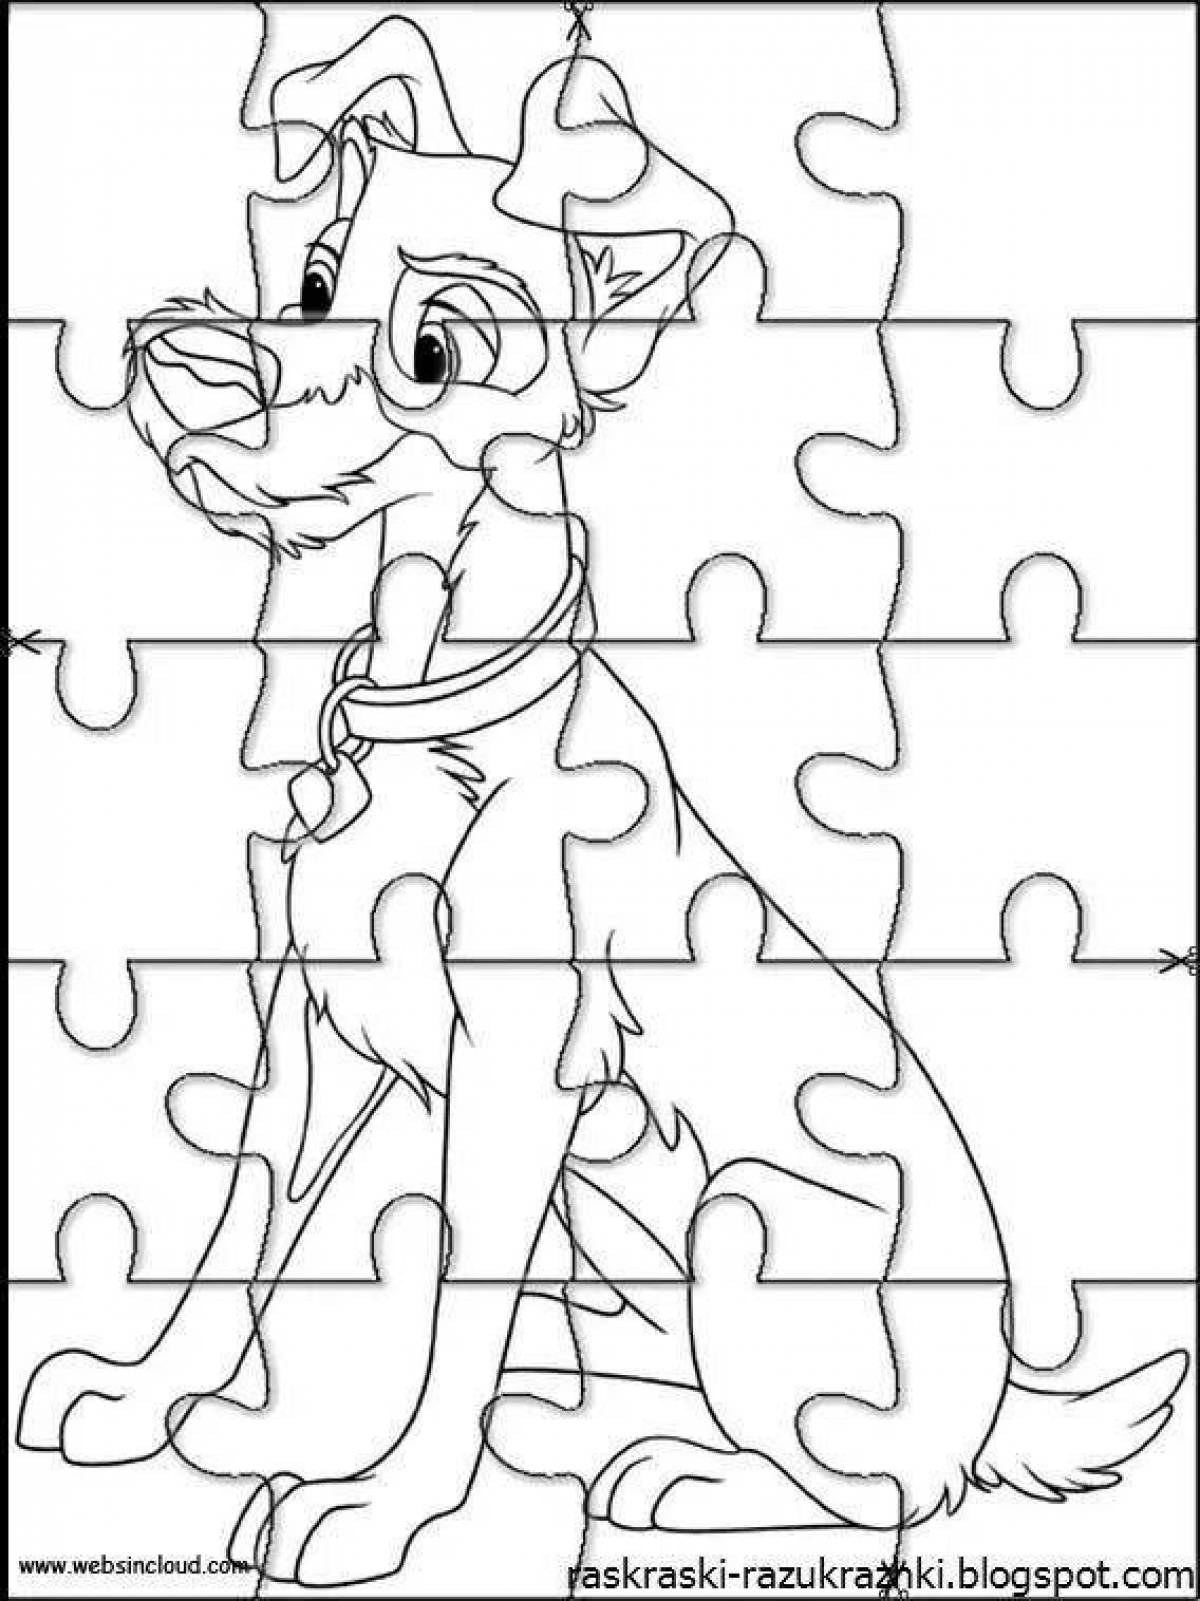 Fun puzzle coloring pages